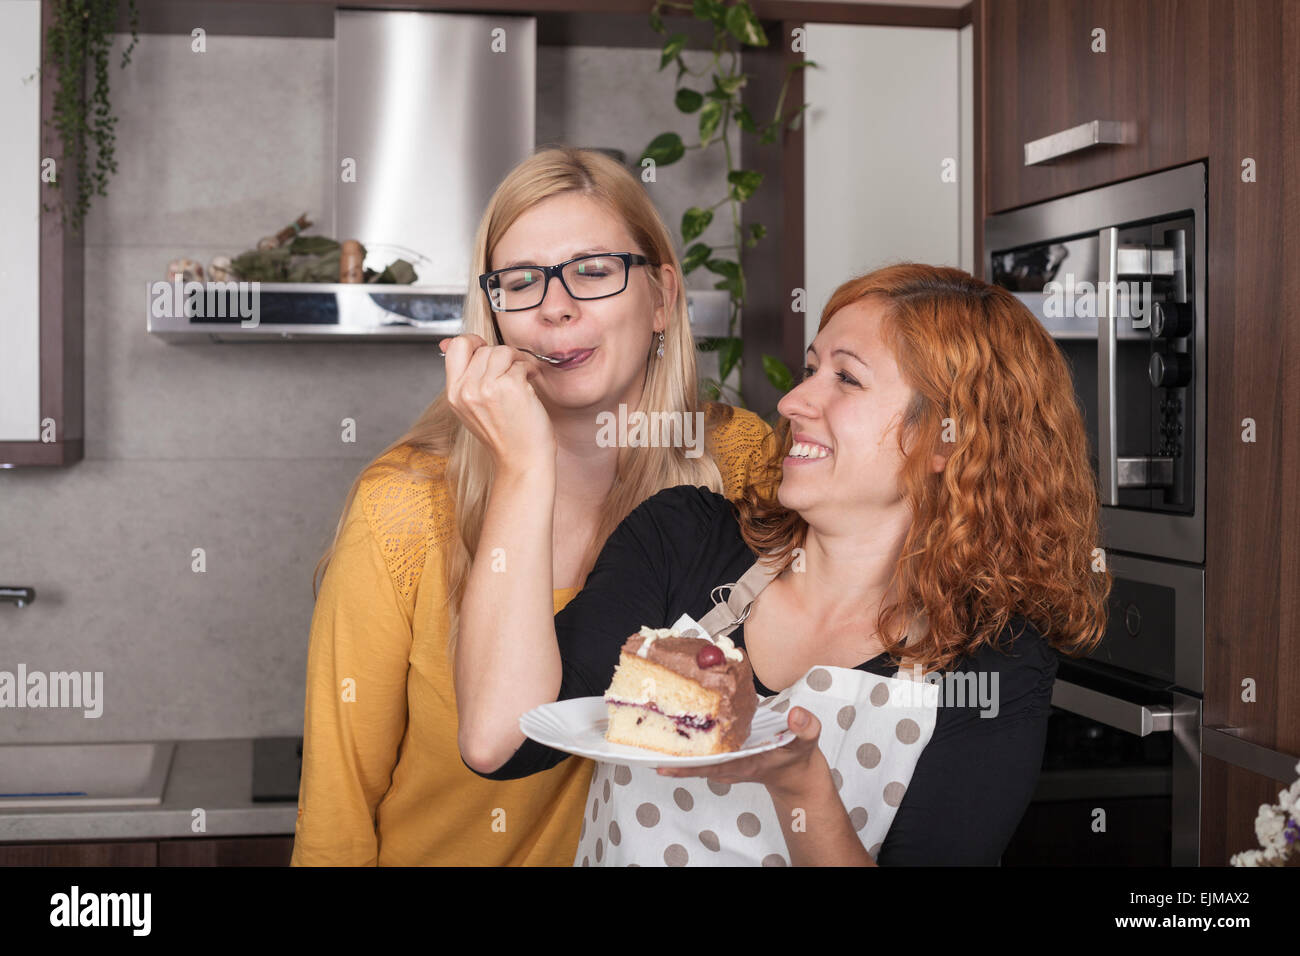 Delighted girlfriends enjoying cake and feeding each other in the kitchen at home. Stock Photo